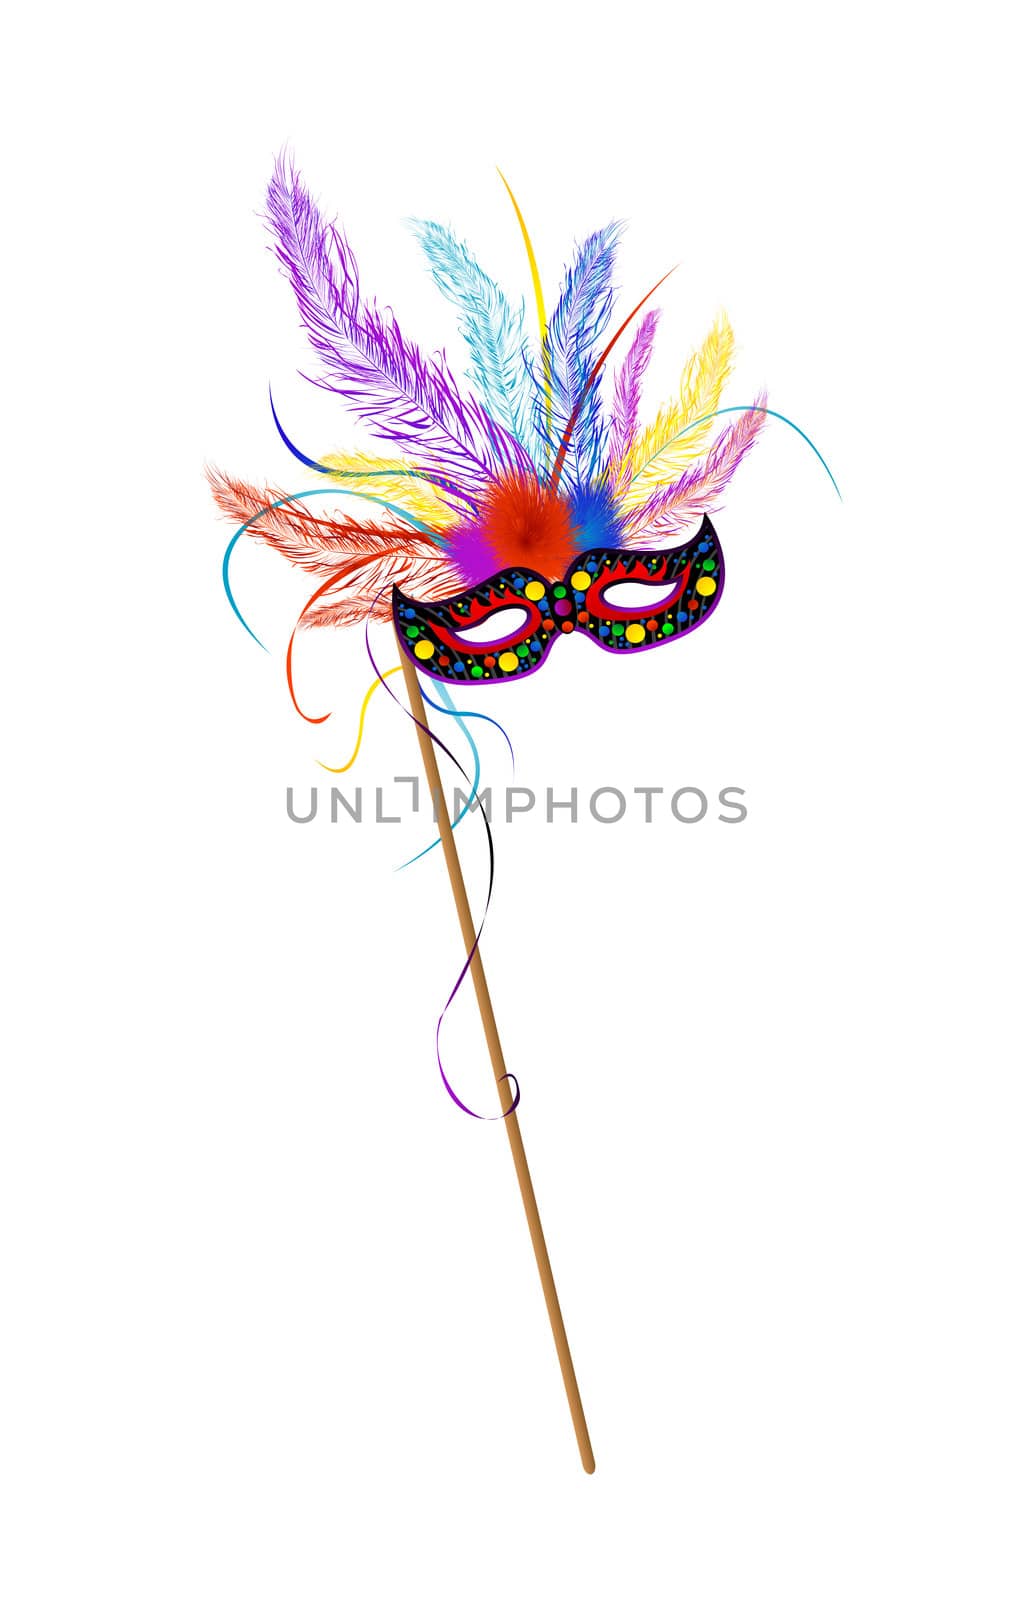 Mardi Grass mask with colored feathes